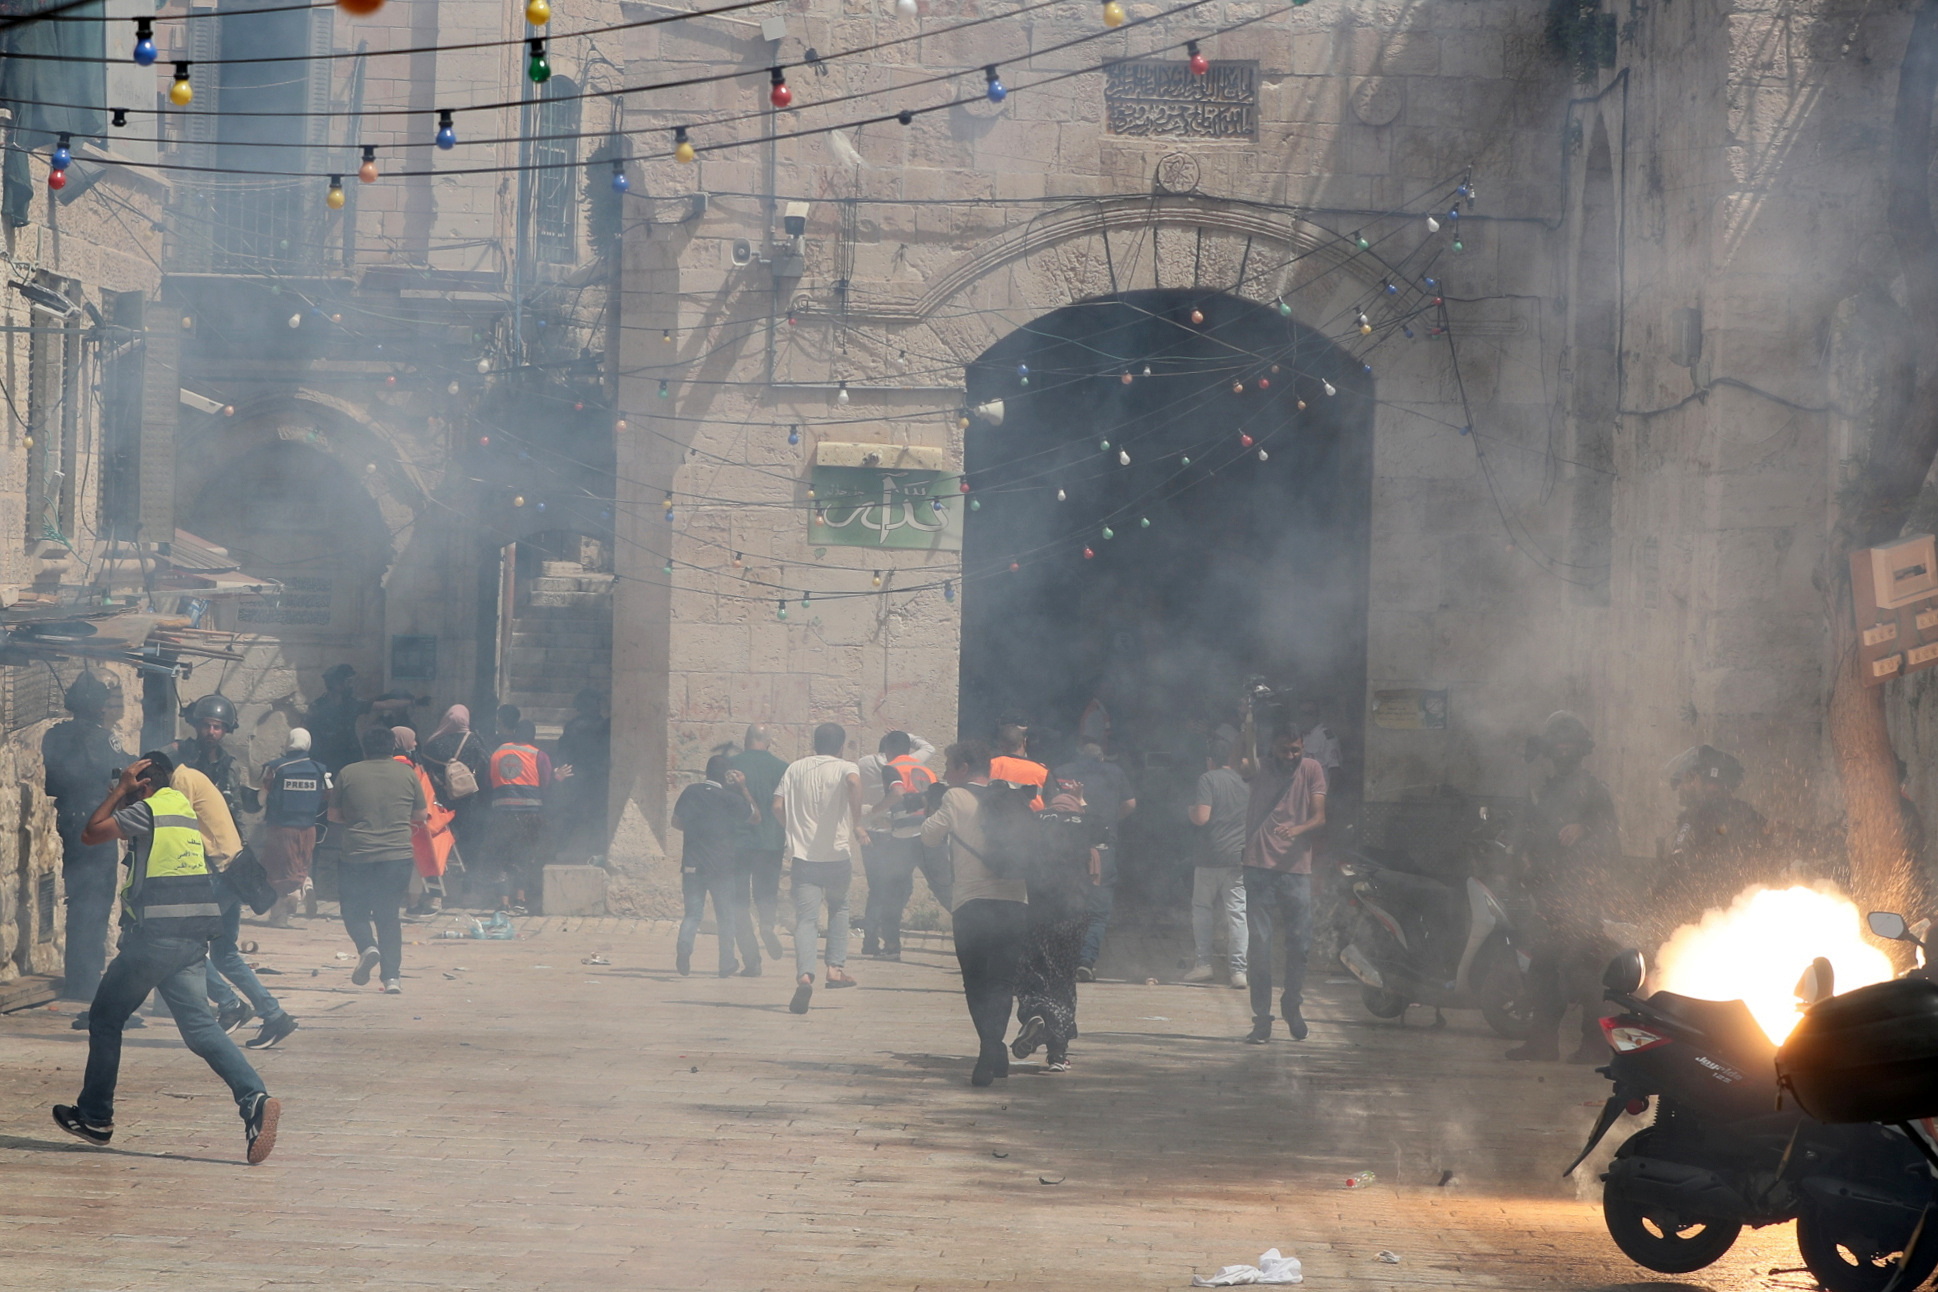 Palestinians run away as Israeli police fire a stun grenade during clashes at the compound that houses Al-Aqsa Mosque, known to Muslims as Noble Sanctuary and to Jews as Temple Mount, in Jerusalem's Old City, May 10, 2021. REUTERS/Ammar Awad